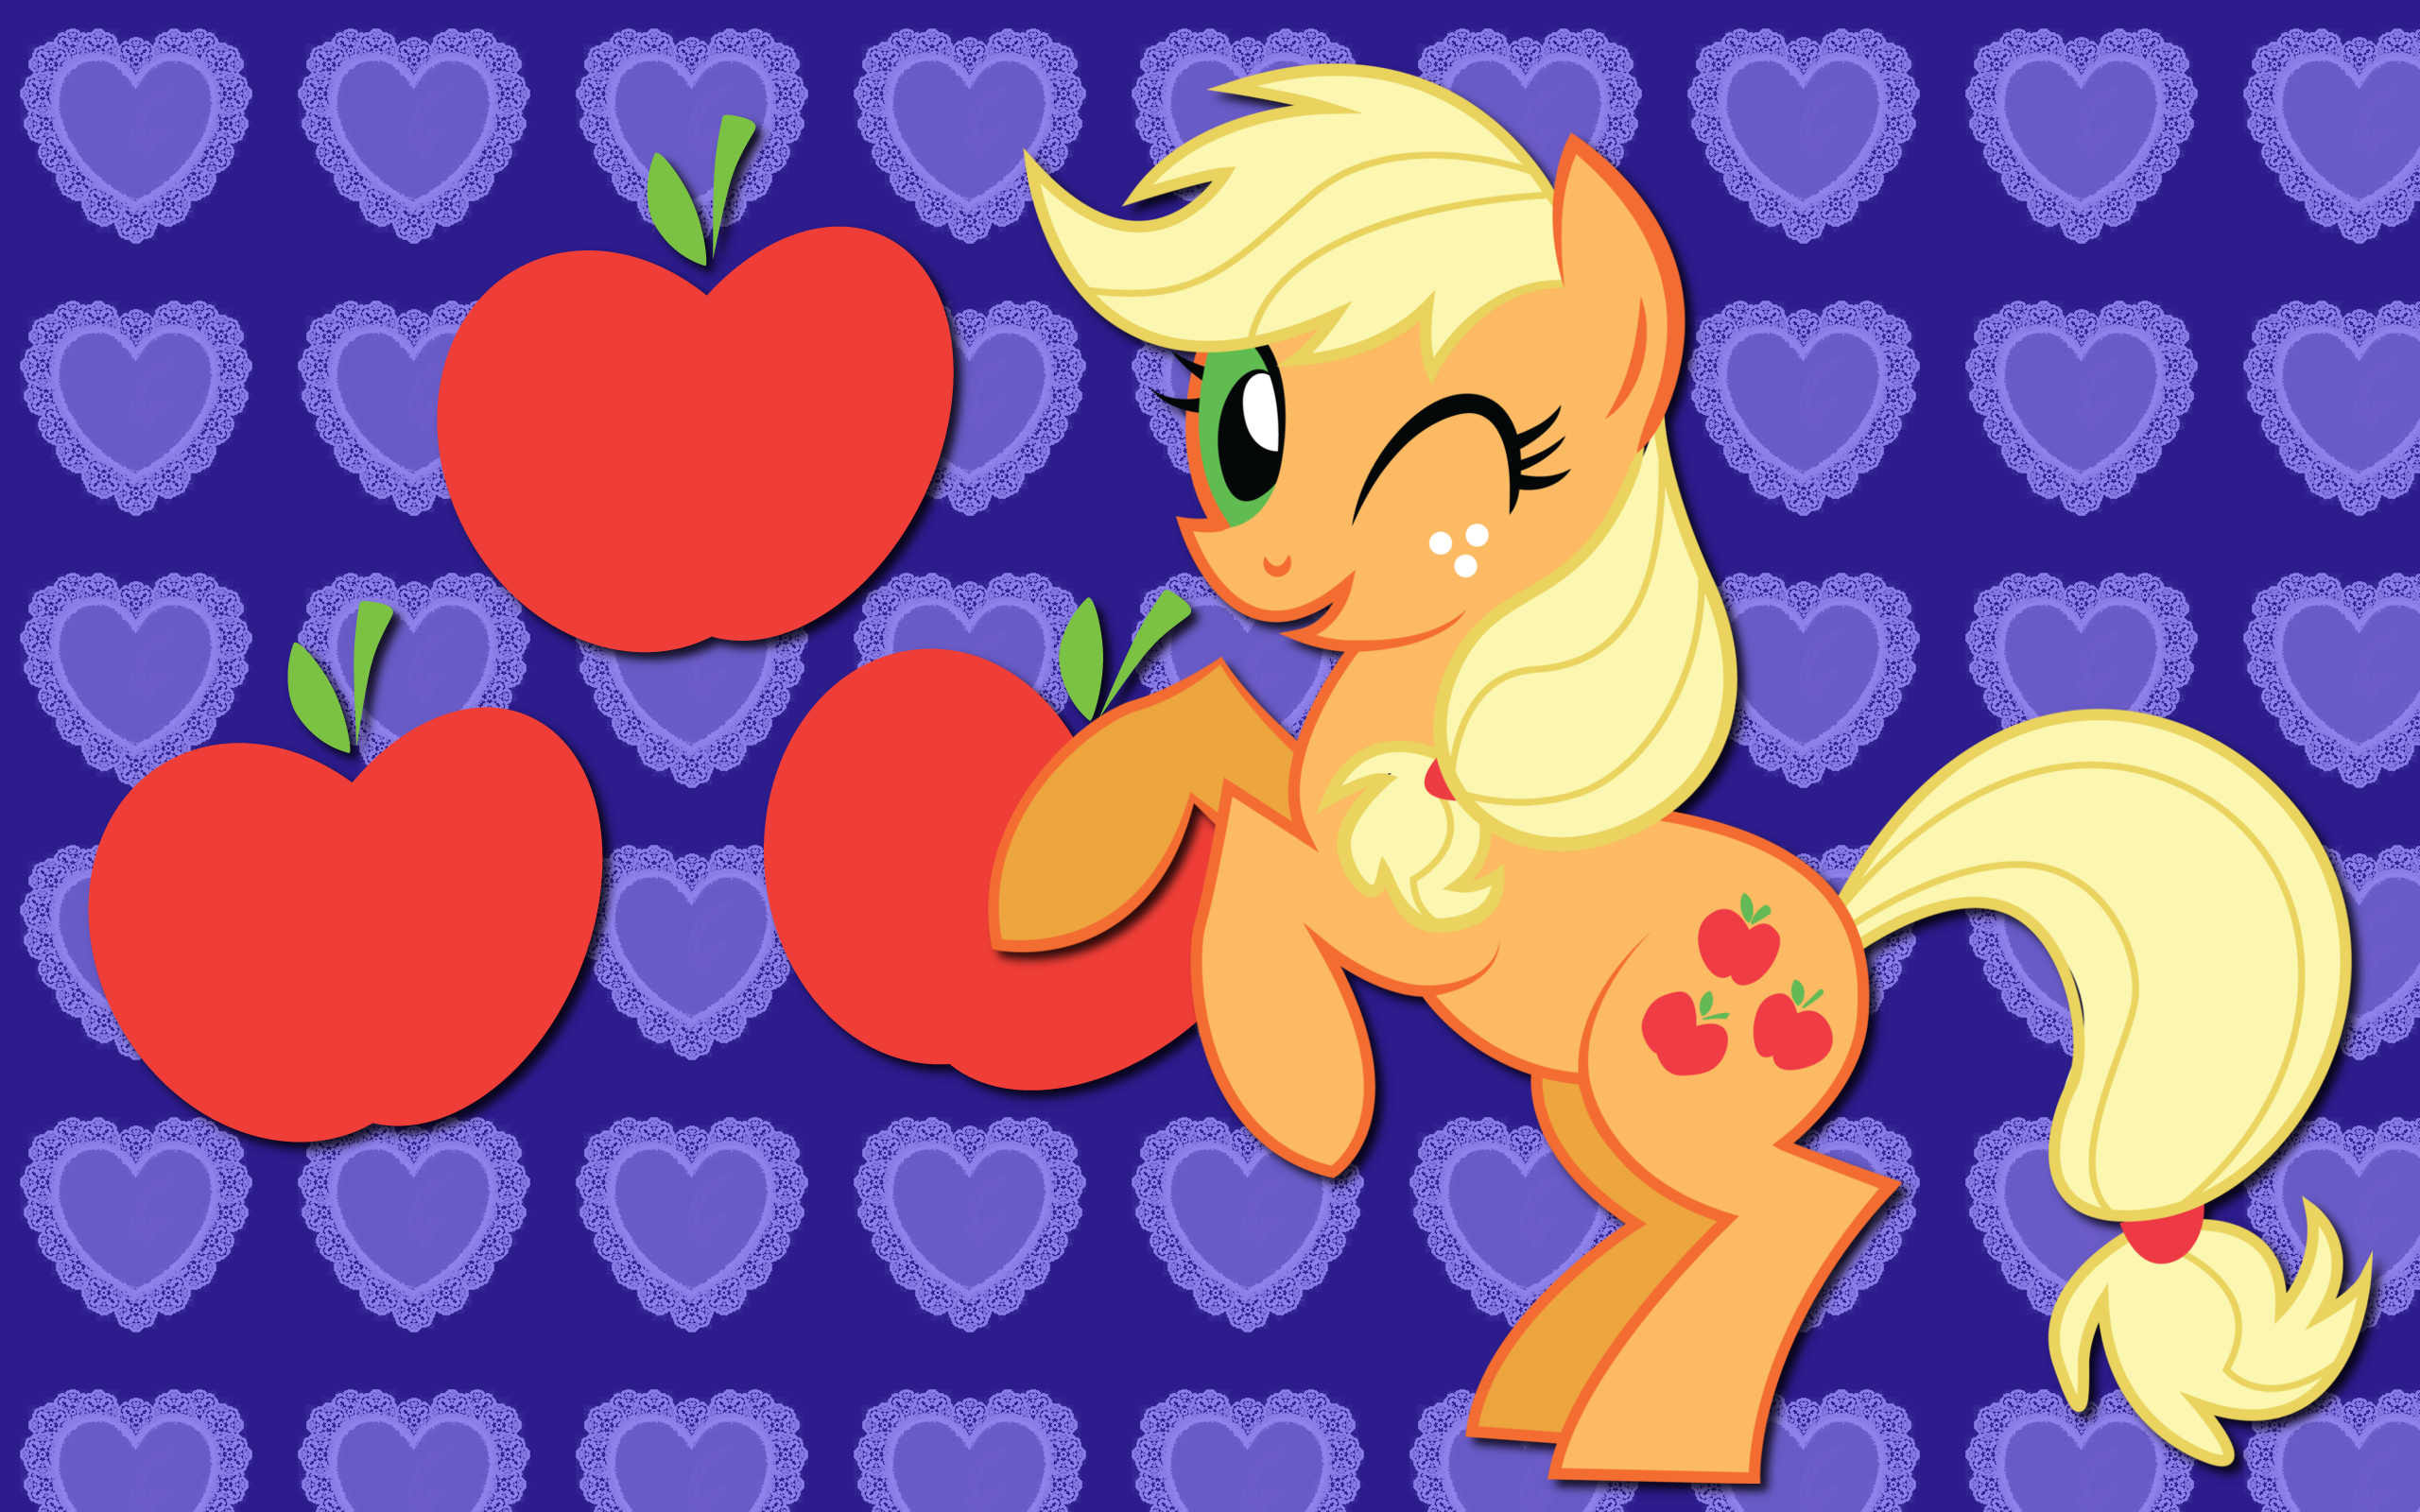 G1 Apple Jack WP by AliceHumanSacrifice0, ooklah and Quanno3